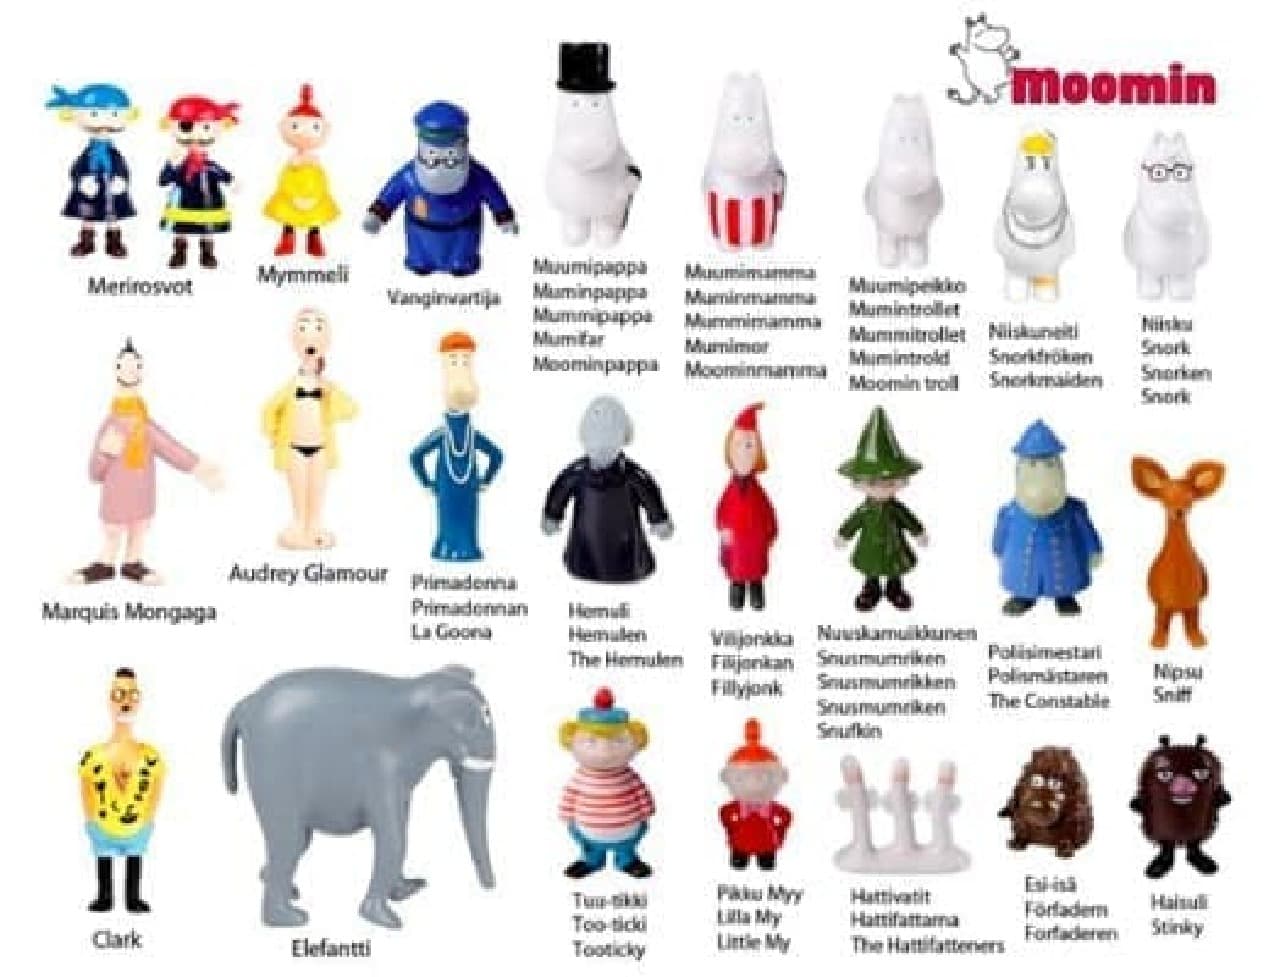 Contains 24 figures (Be careful of spoilers!) (Source: All Things MOOMIN)